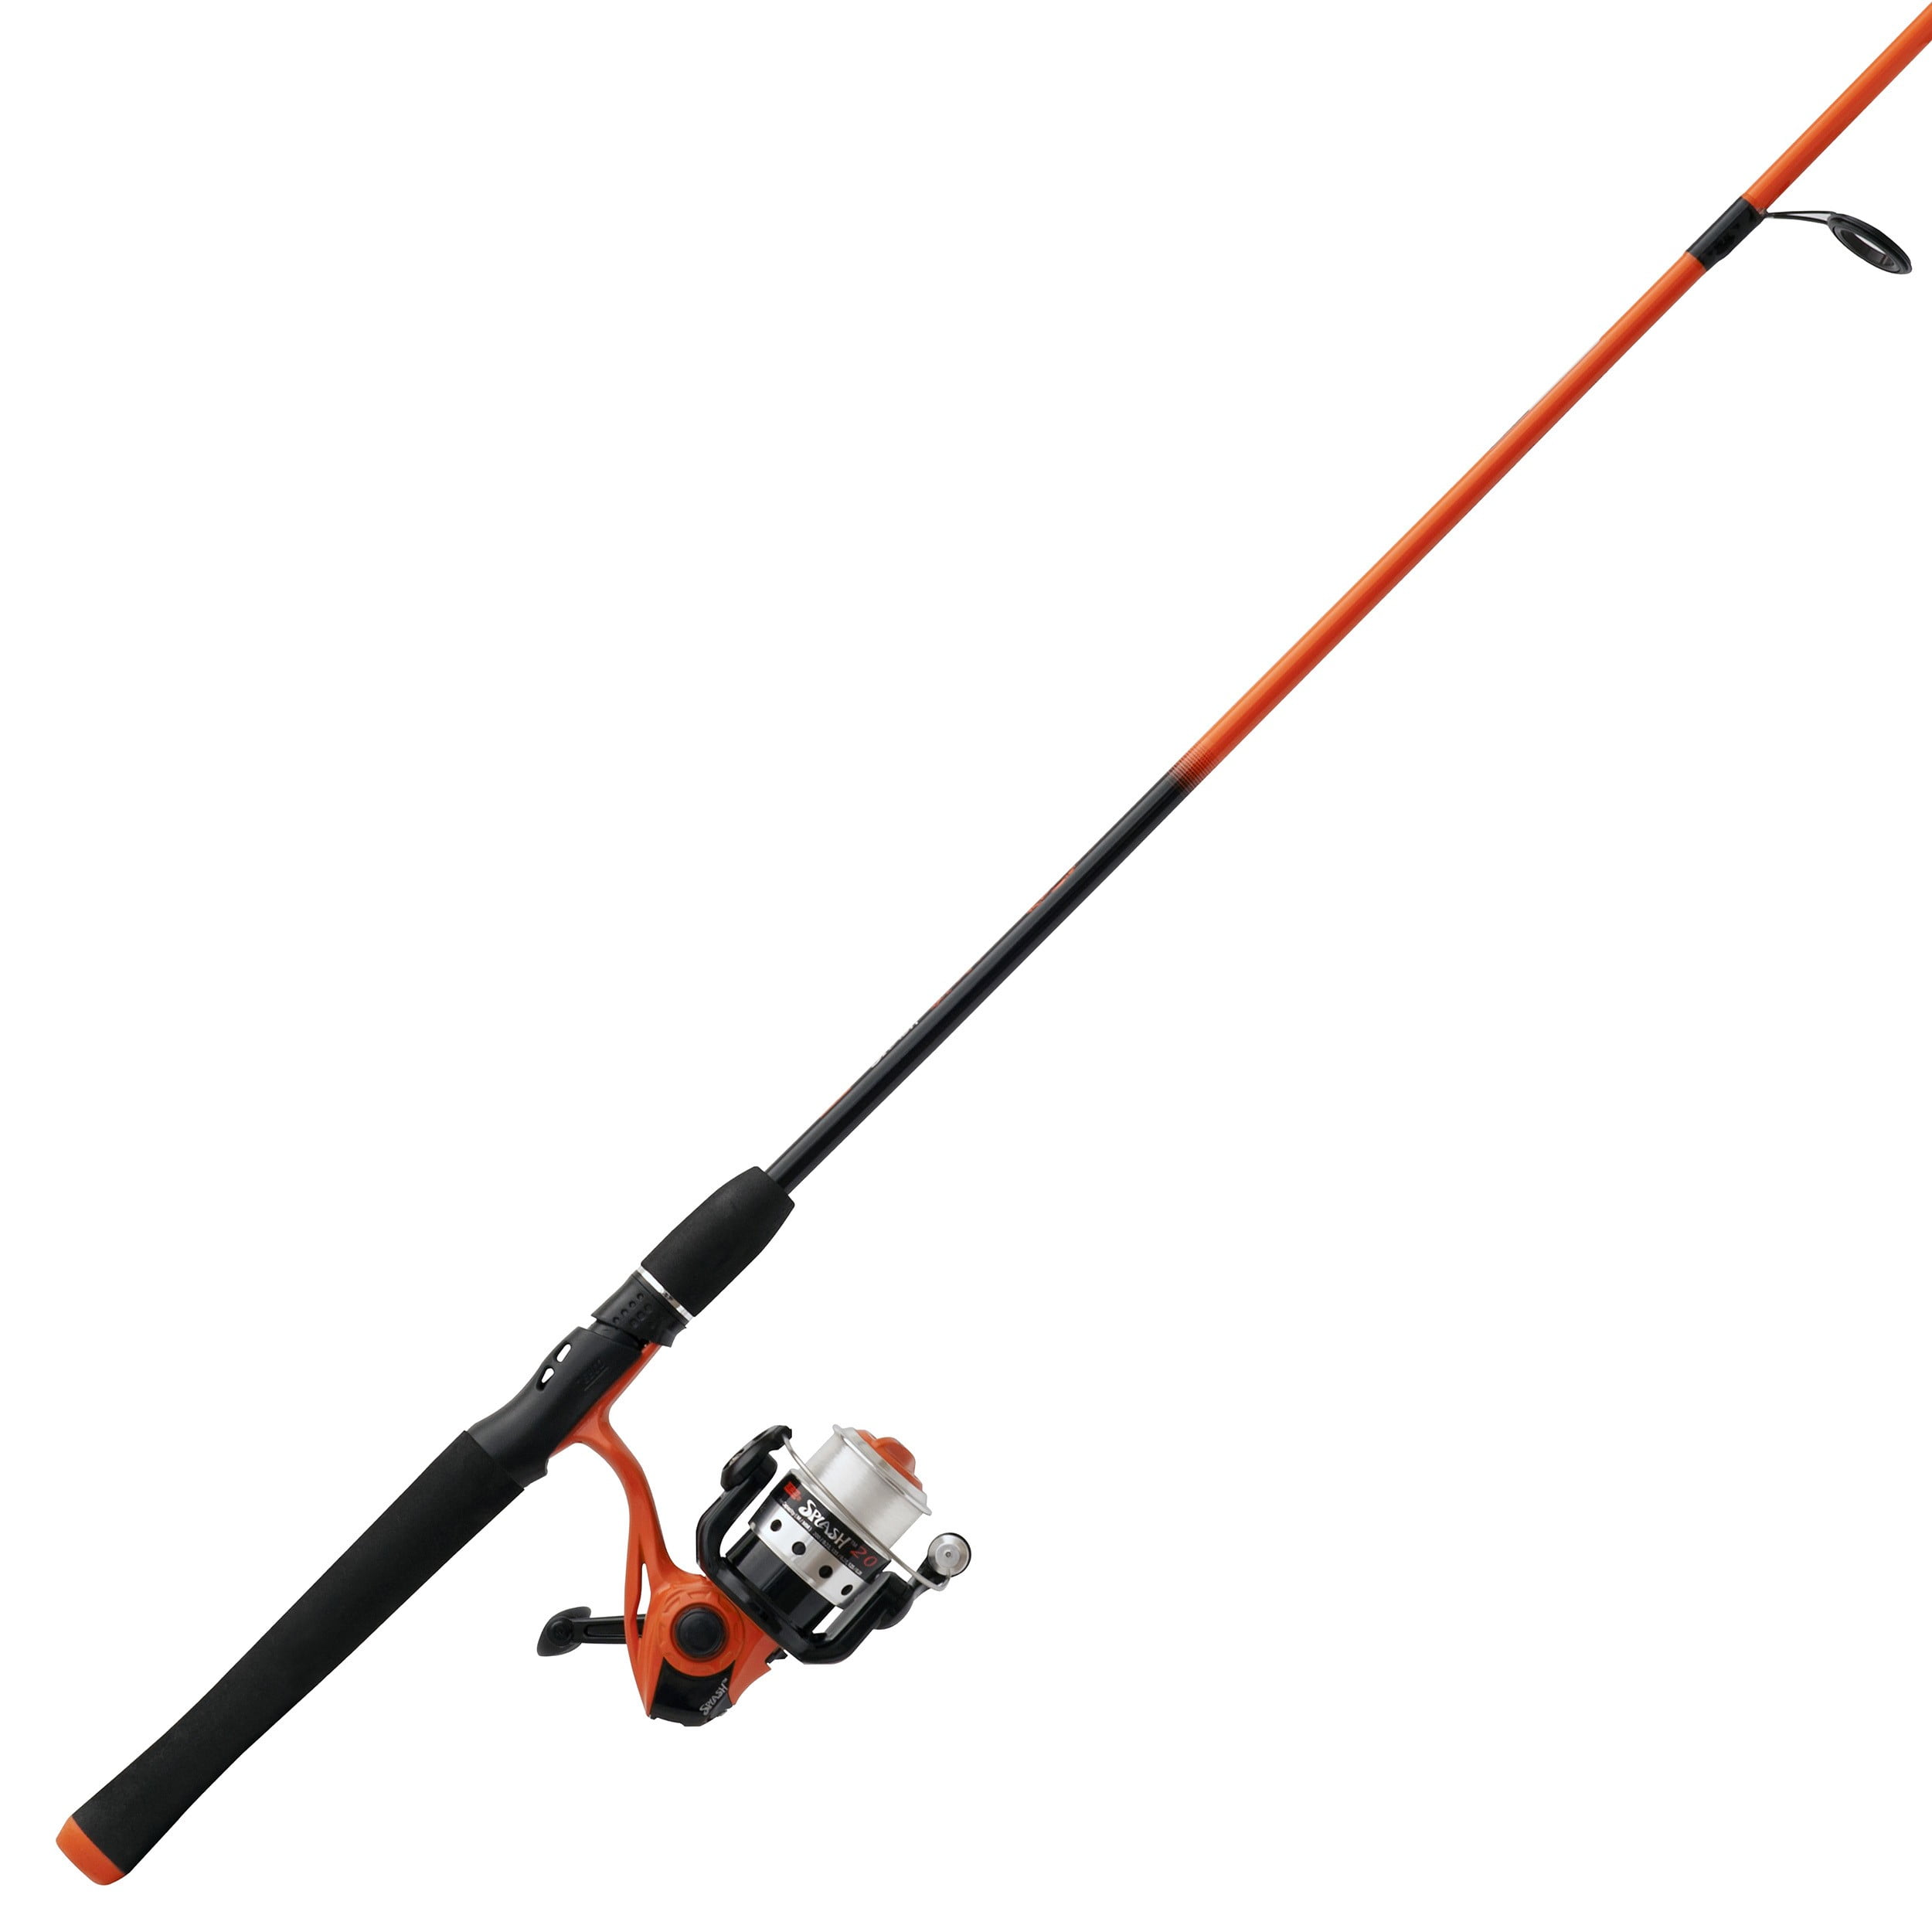 Zebco Splash Spinning Reel and Fishing Rod Combo, 6-Foot 2-Piece